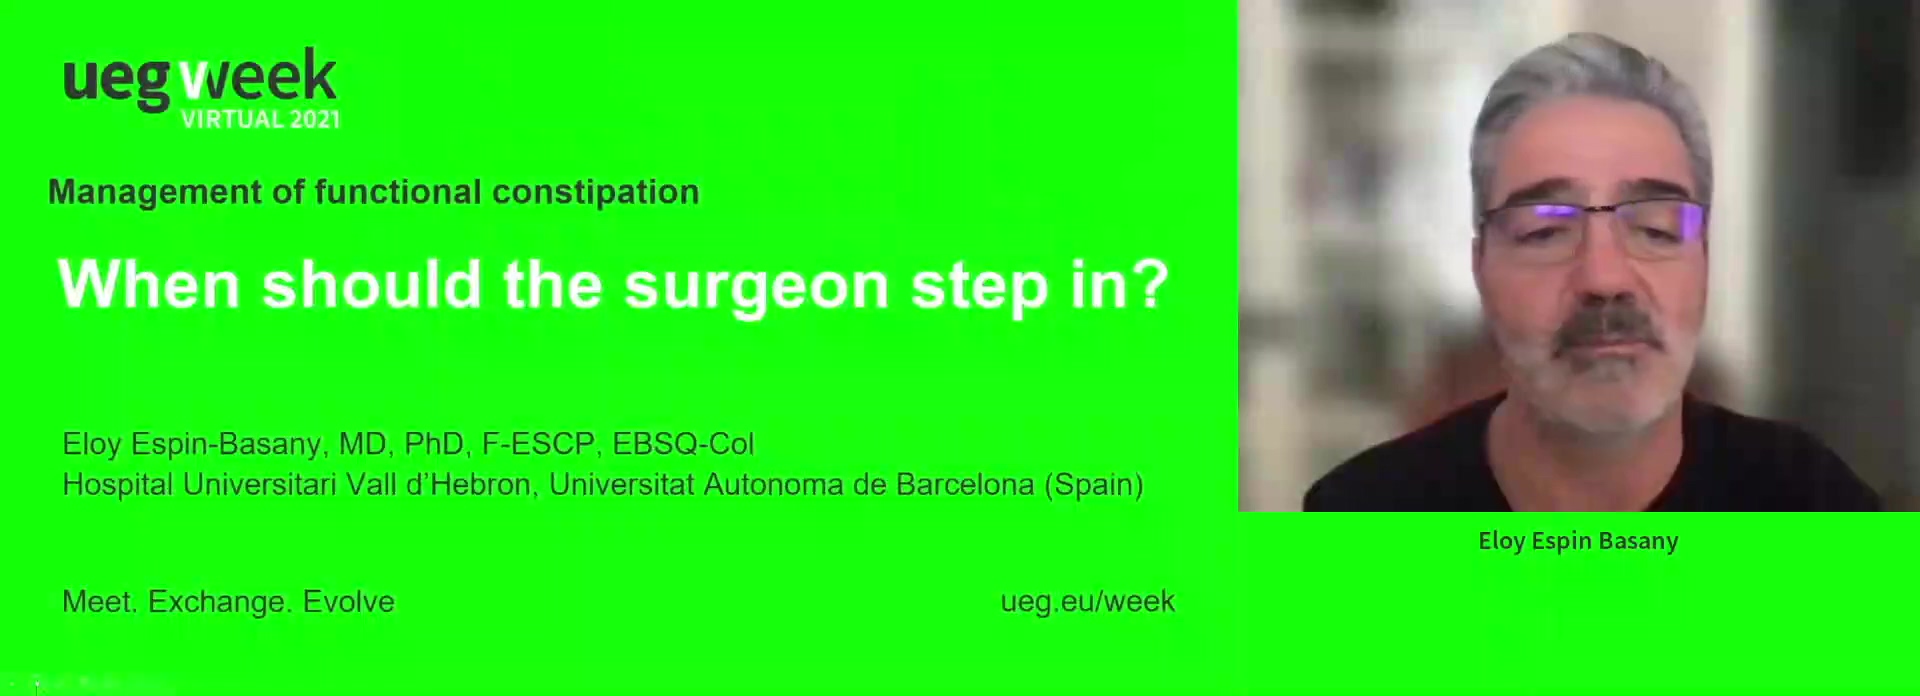 When should the surgeon step in?